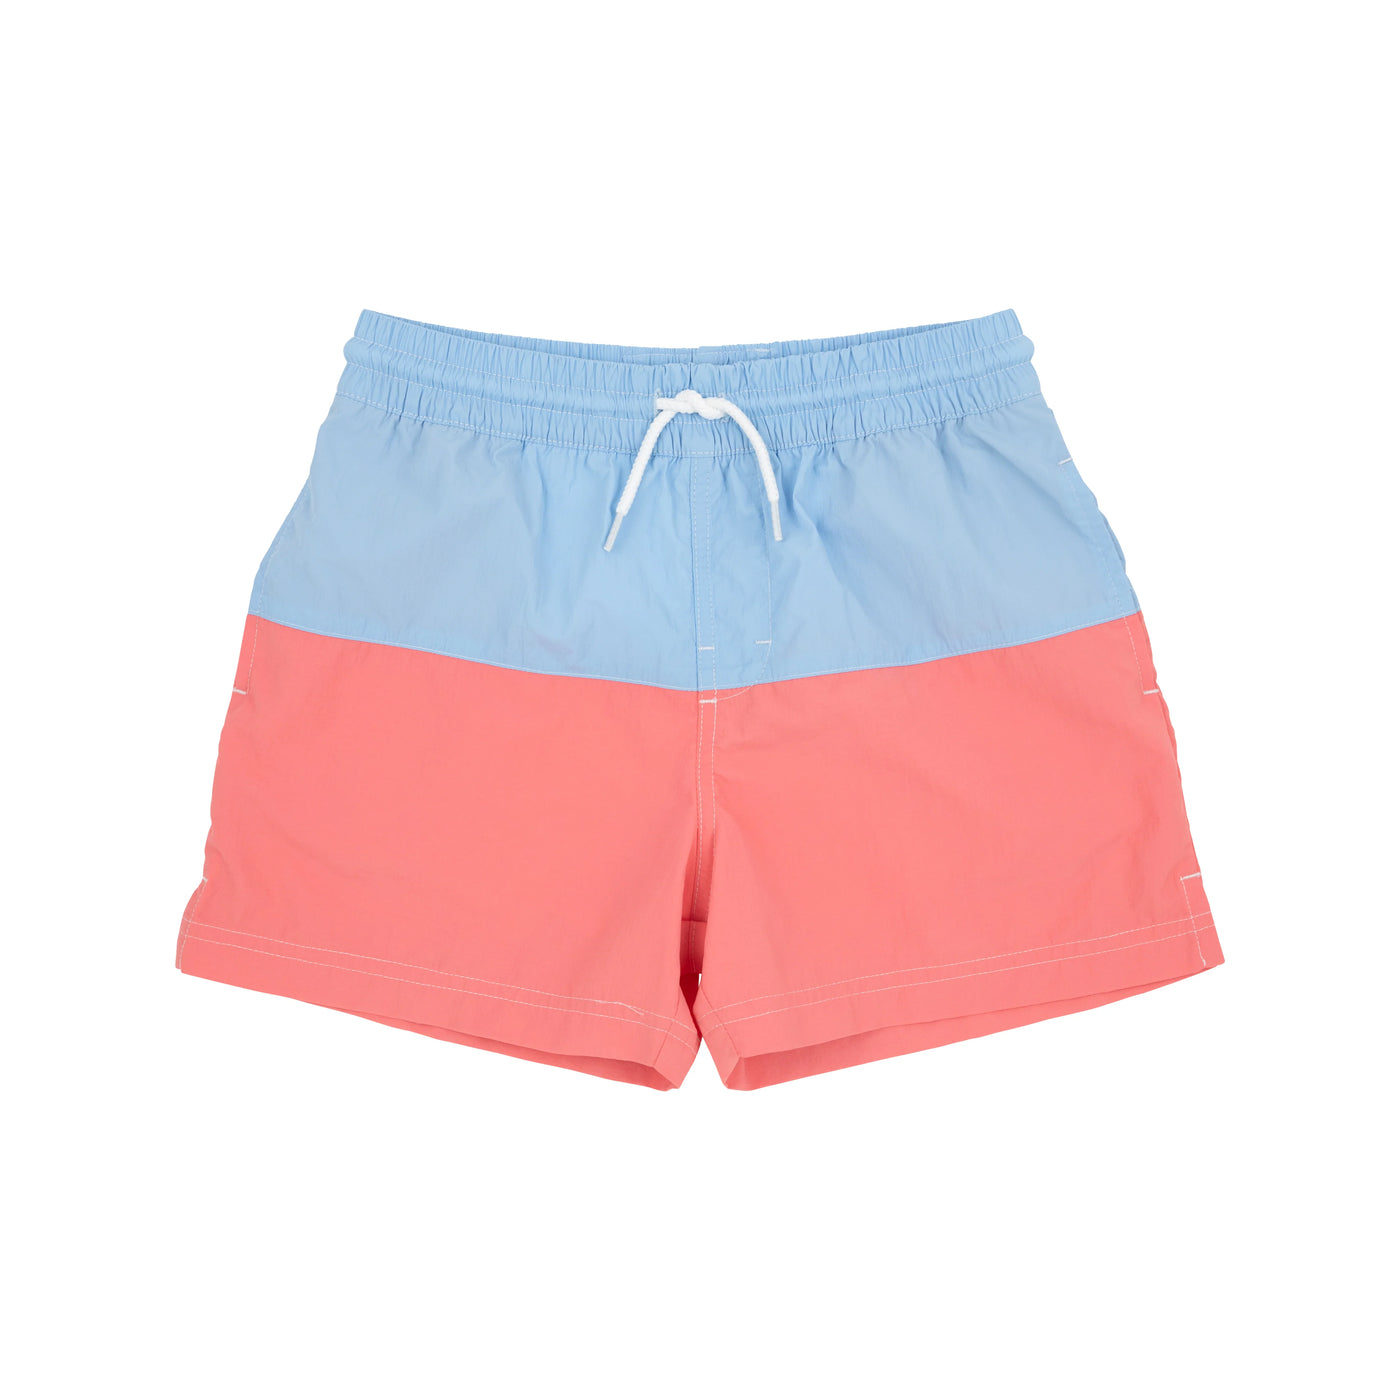 Beale Street Blue & Parrot Cay Coral Country Club Colorblock Trunks